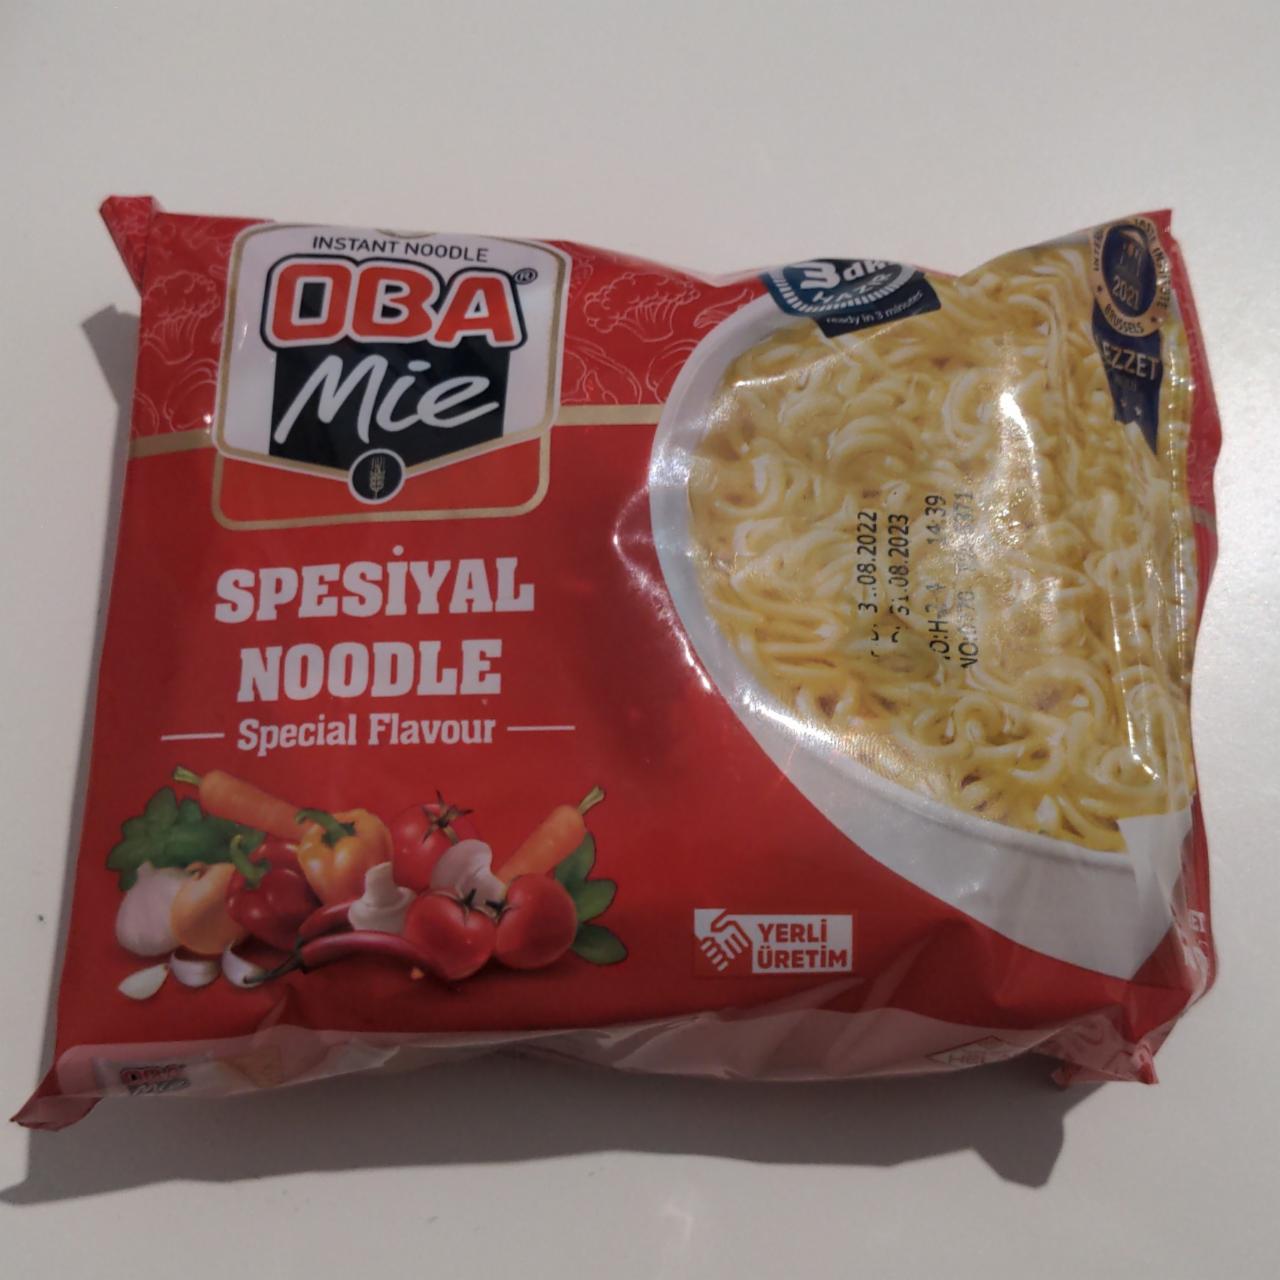 Фото - Spesiyal noodle special flavour Oba Mie